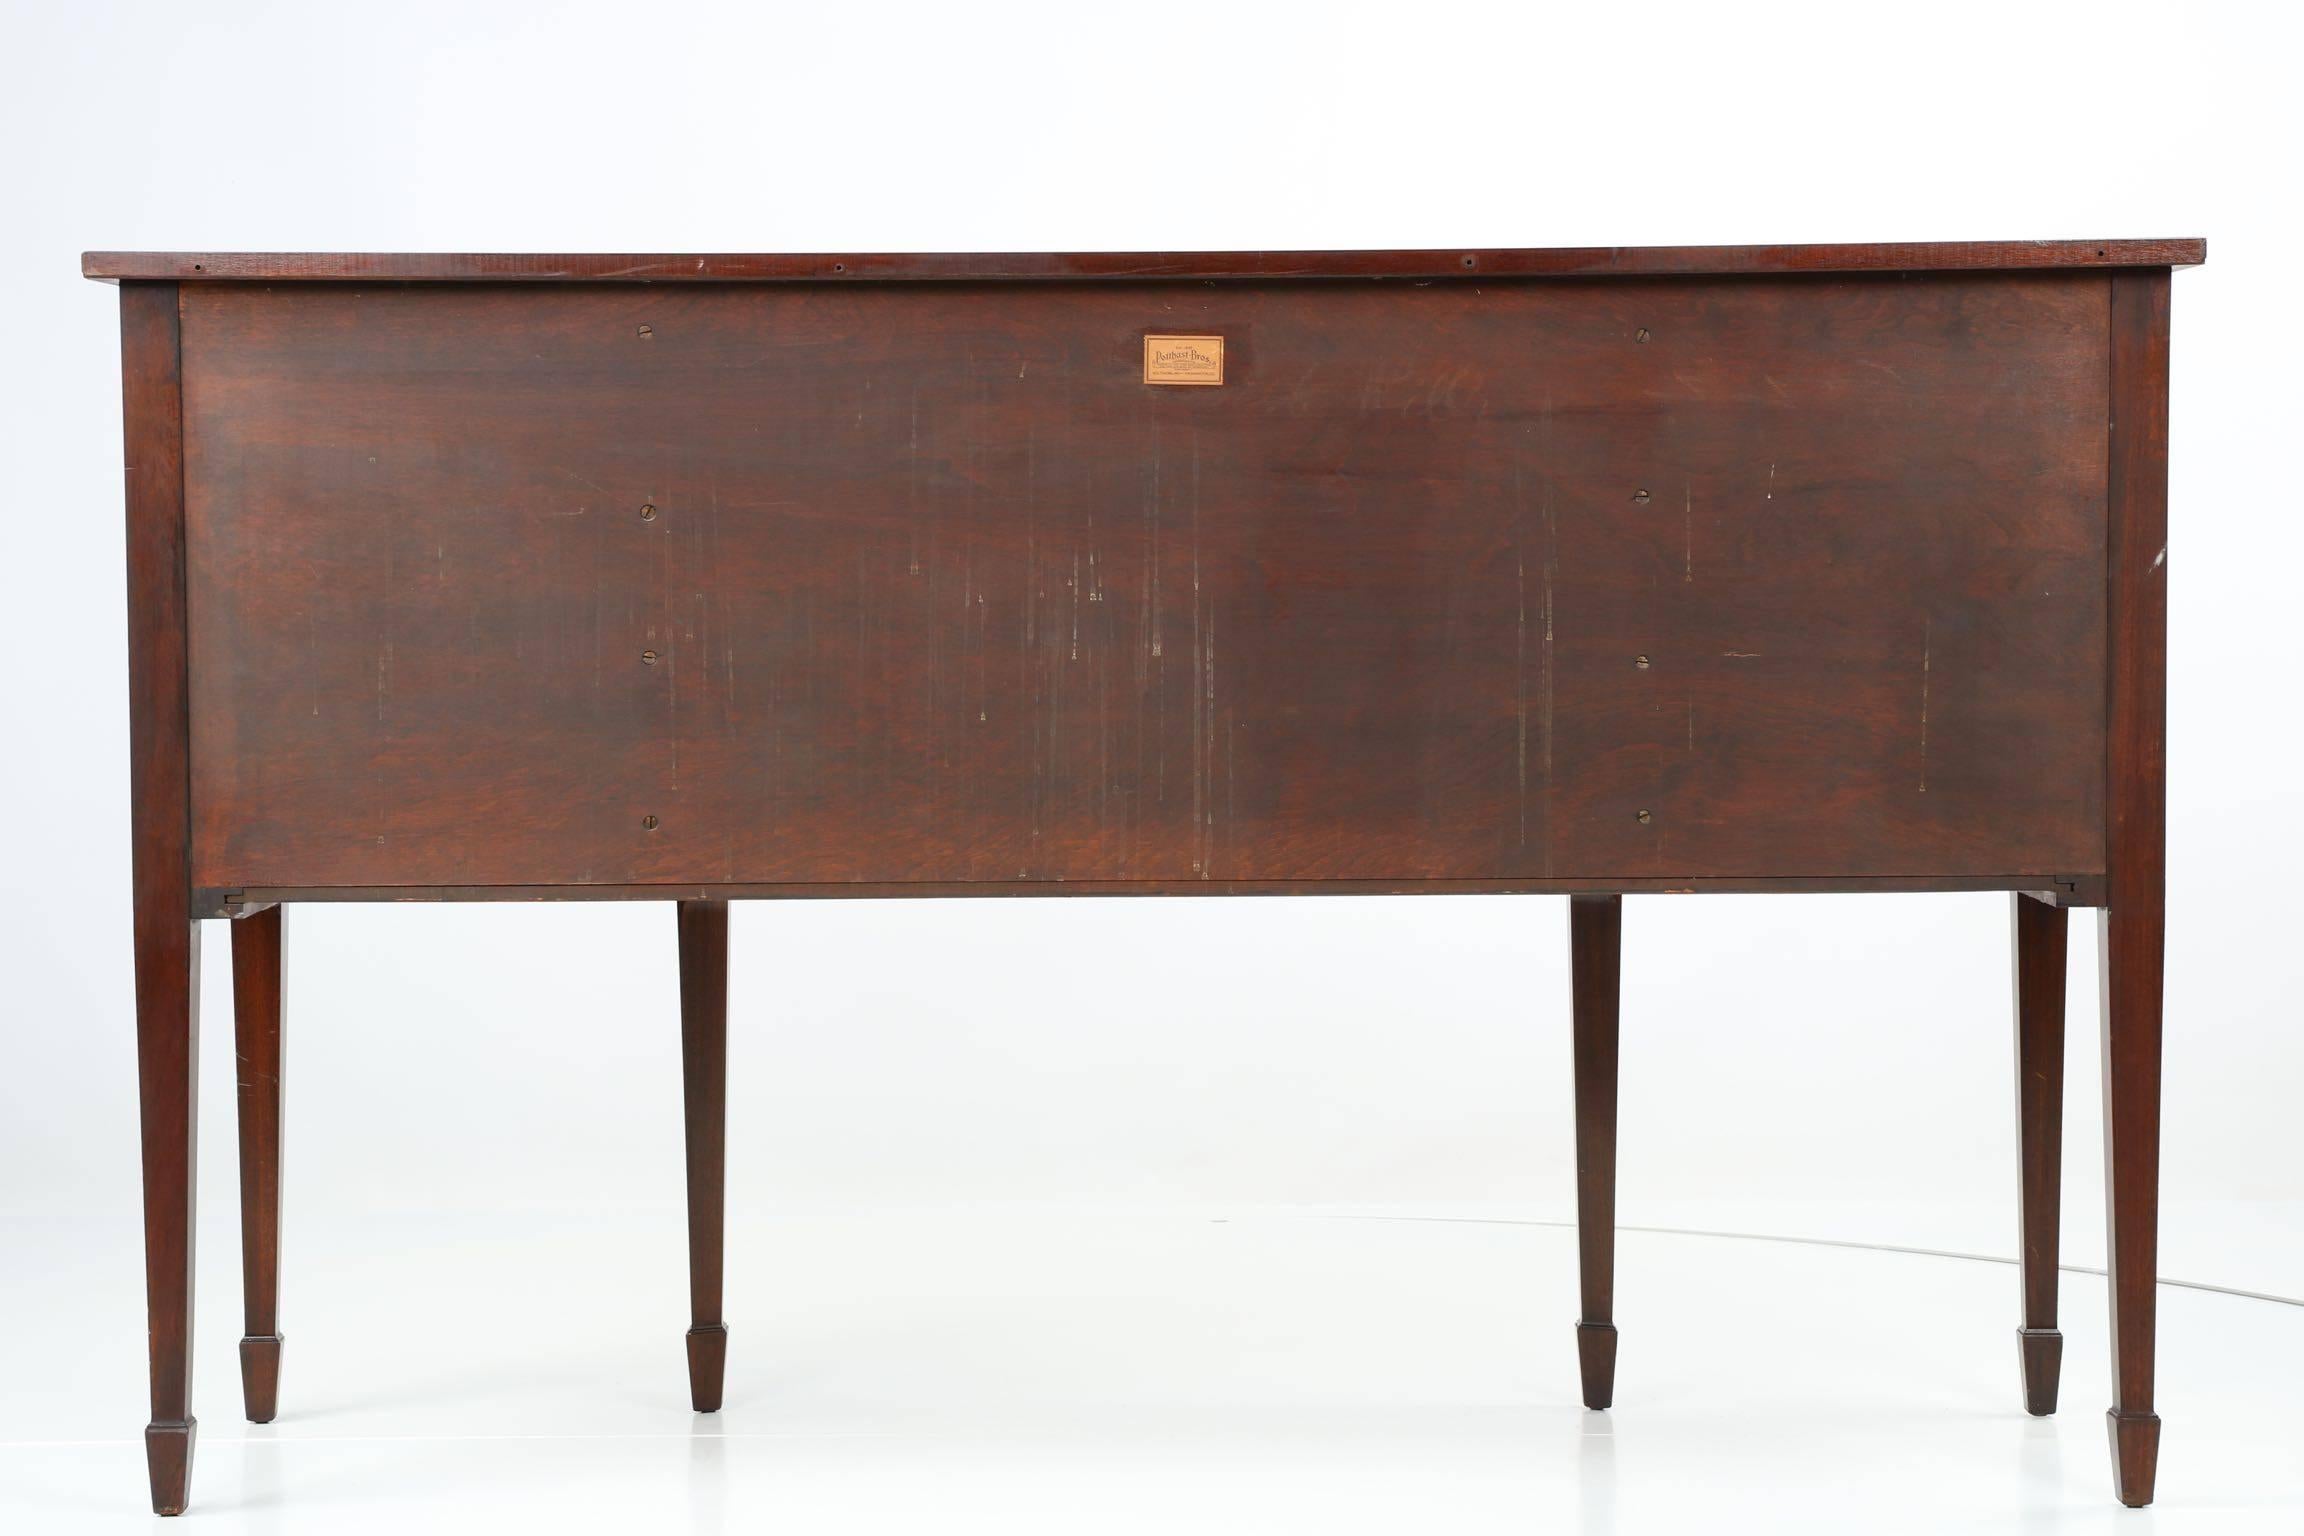 20th Century Potthast Brothers American Federal Style Inlaid Mahogany Sideboard